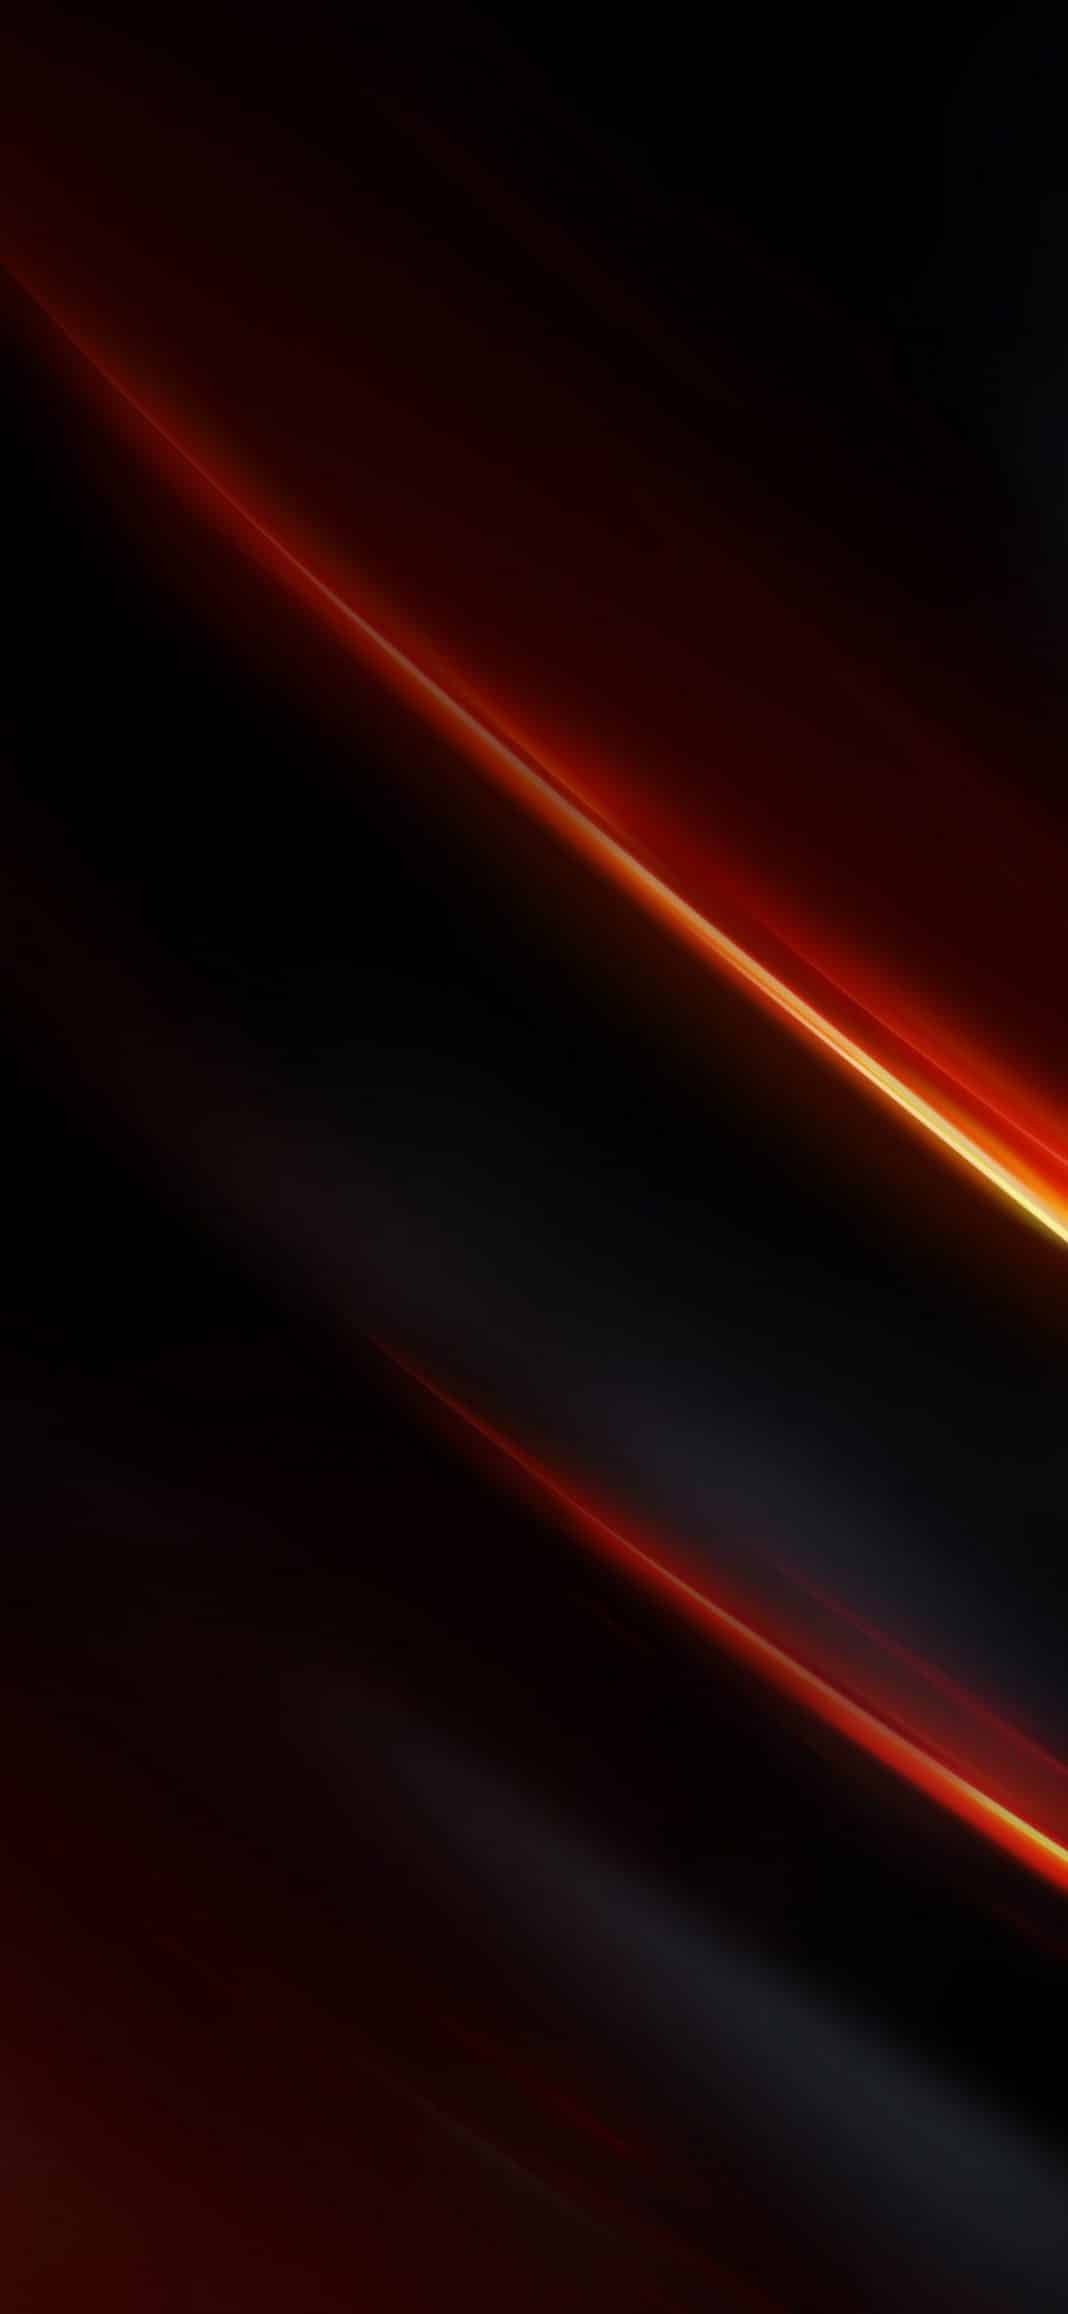 OnePlus 7T Pro McLaren Edition Wallpapers (HD+ Resolution)